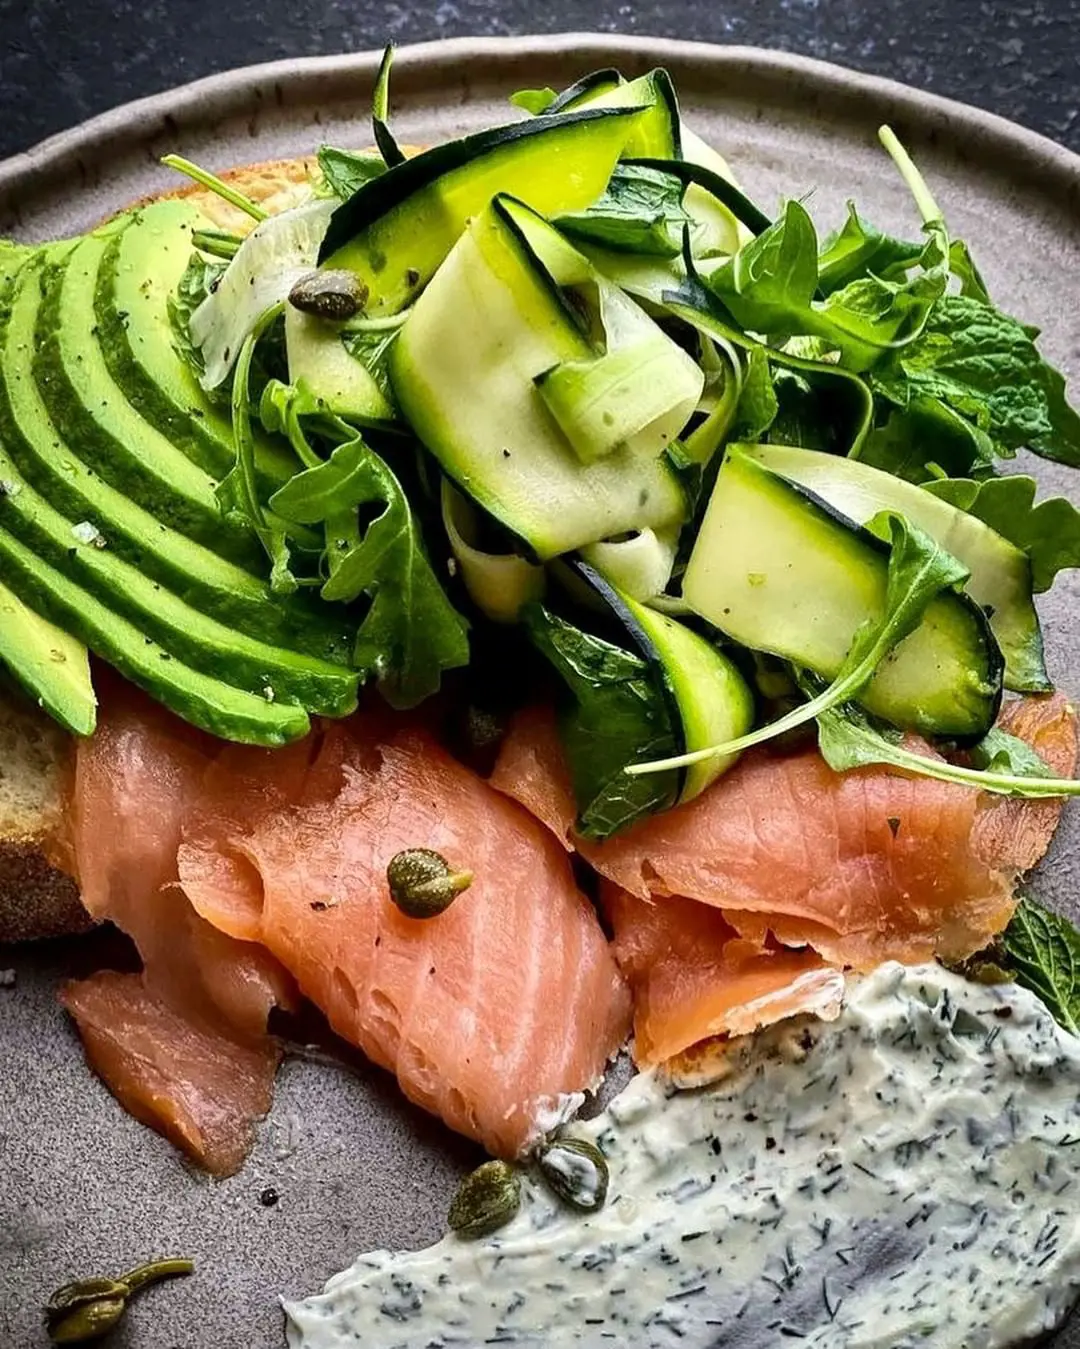 Flavorful smoked salmon, silky avocado, and a bright home made vinaigrette